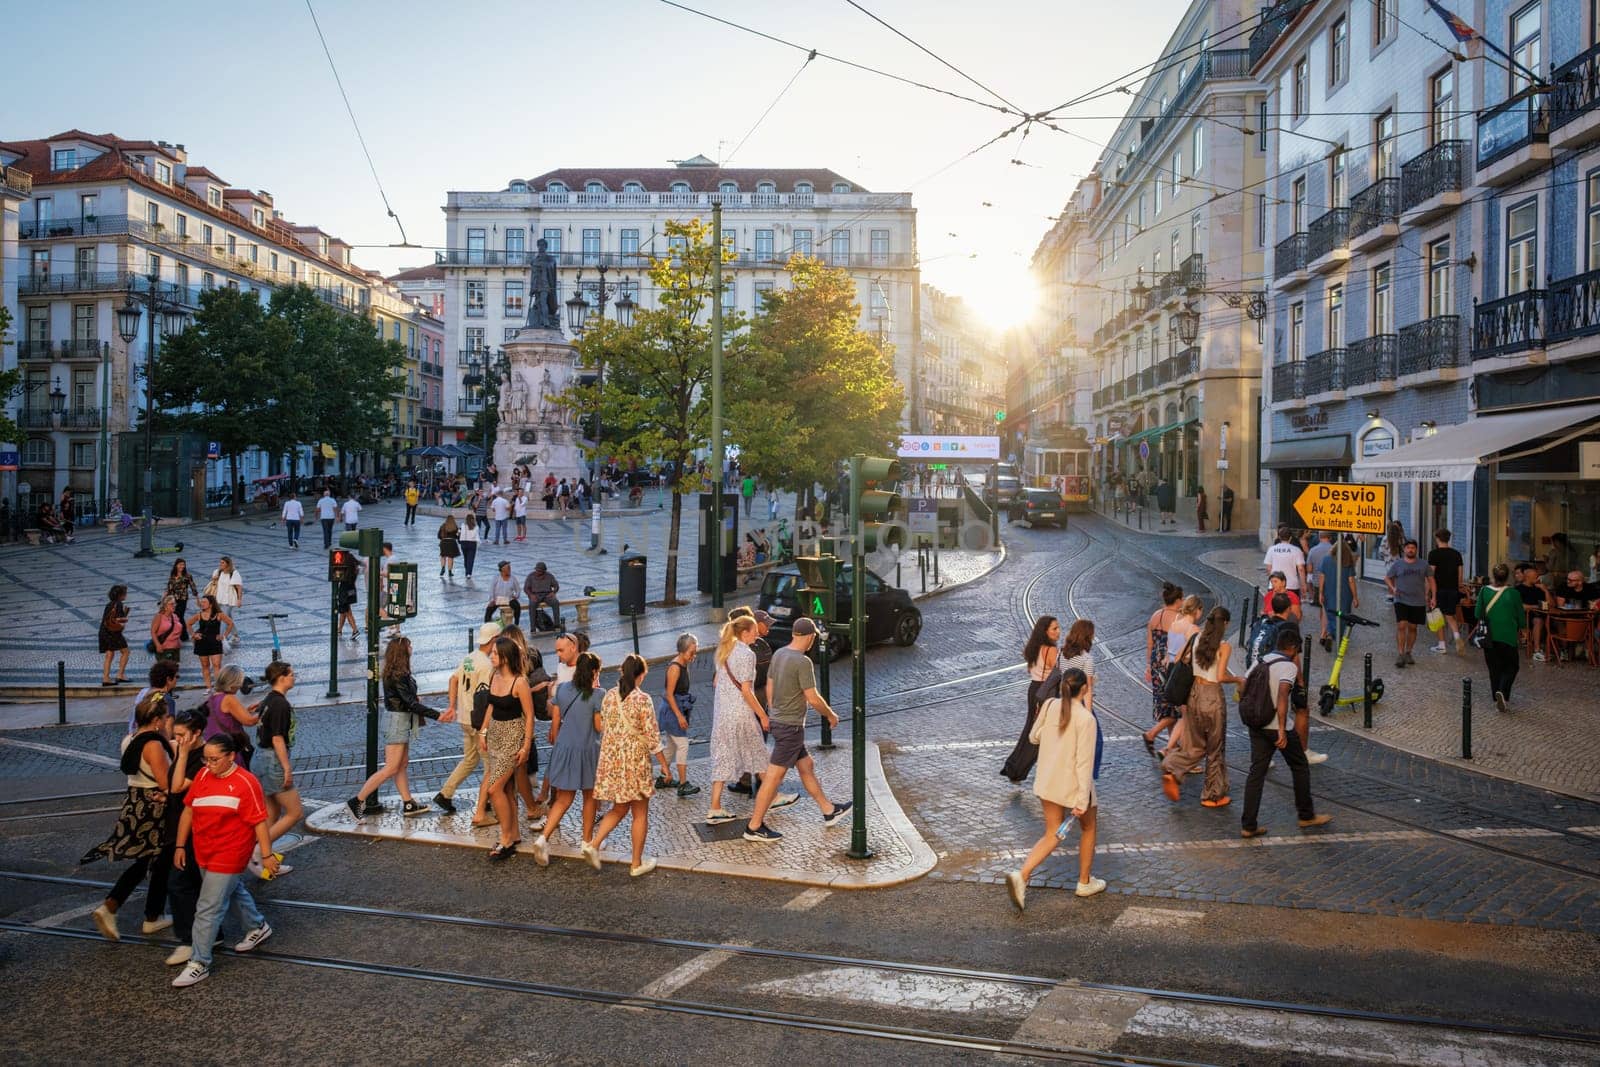 People crossing the road at the crowded Luis De Camoes square Praca Luis de Camoes in Lisbon by dimol